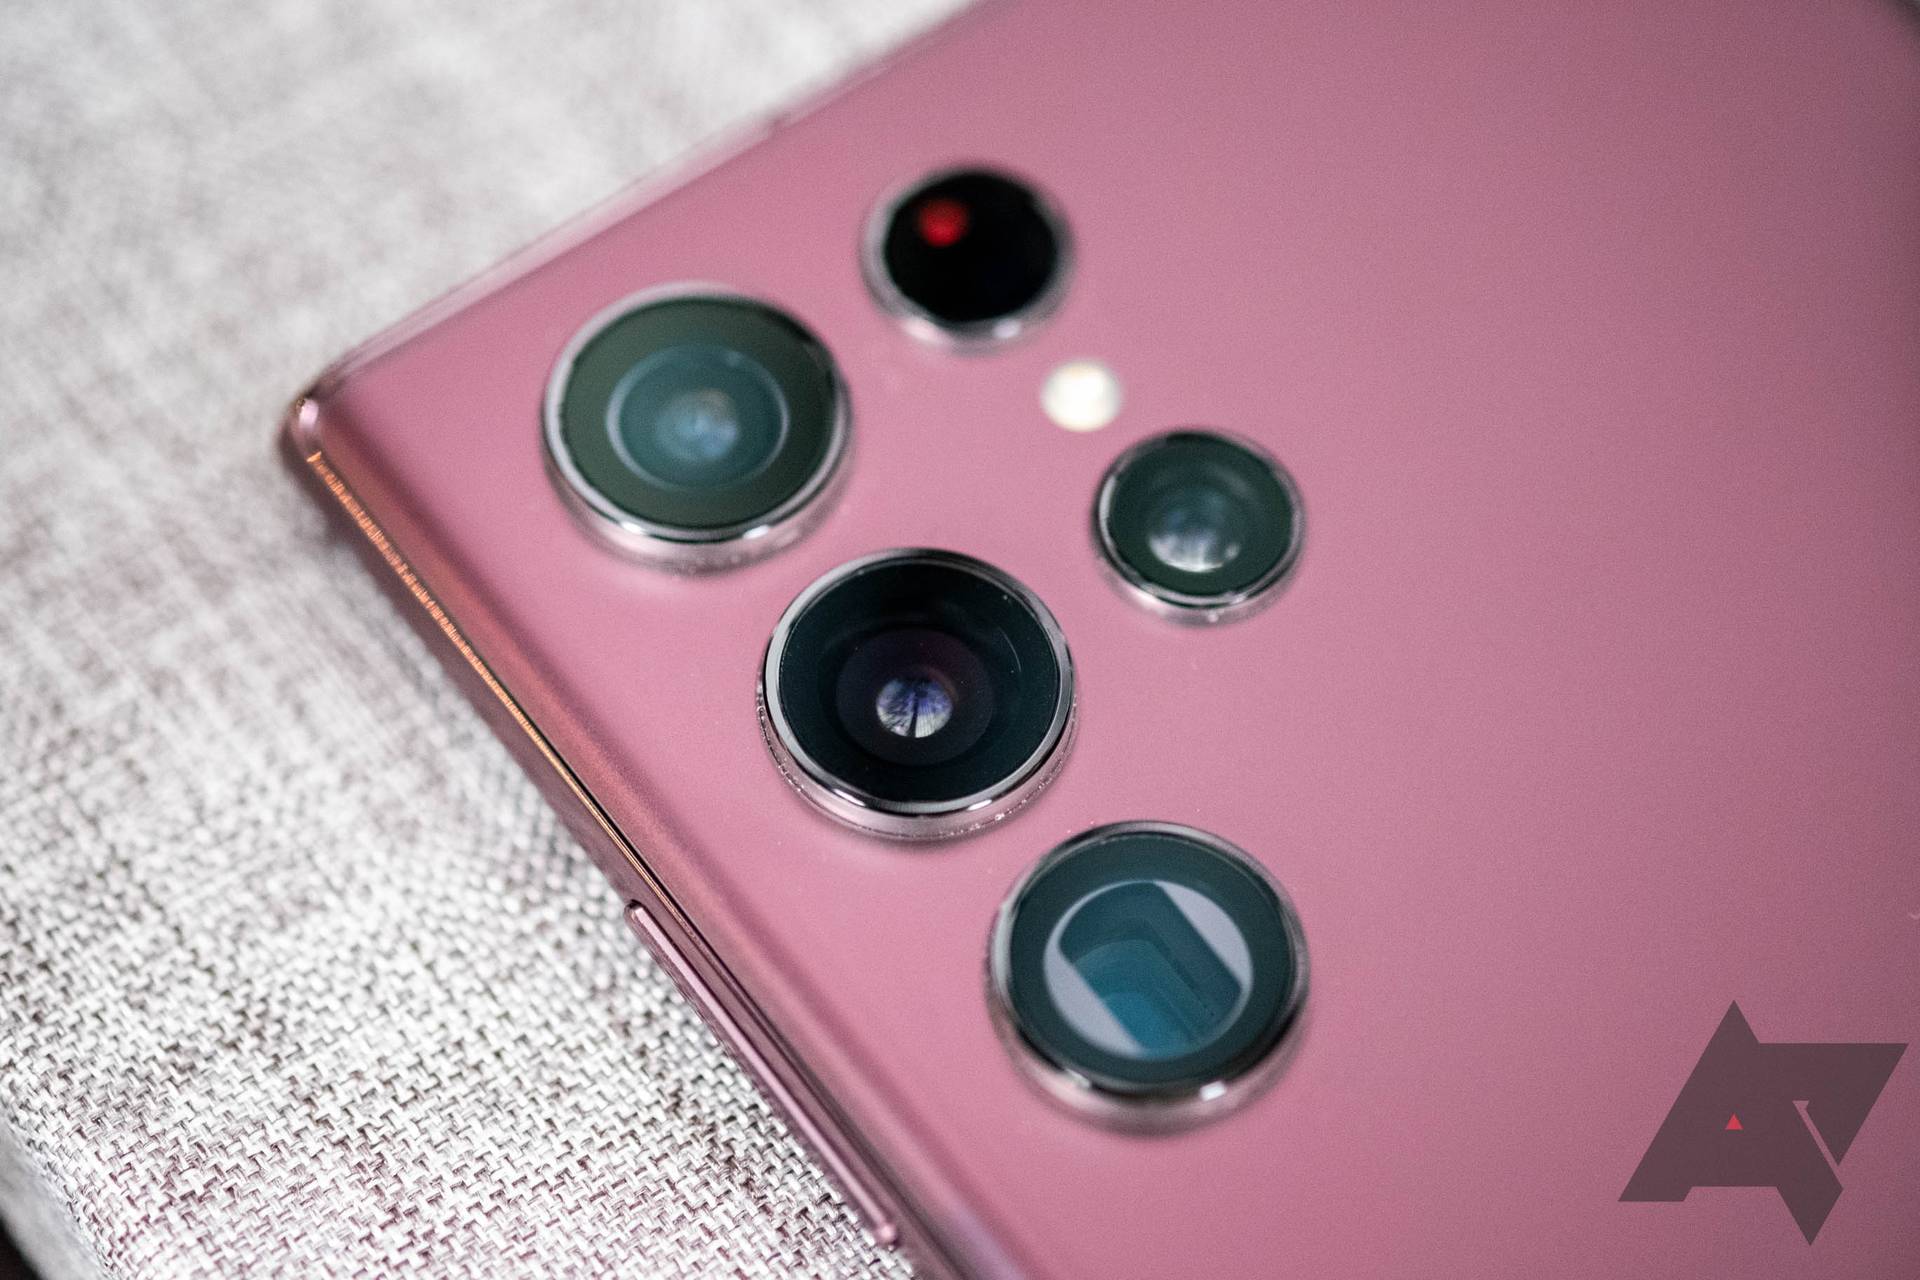 Samsung upgrades Expert RAW camera app for improved low-light performance